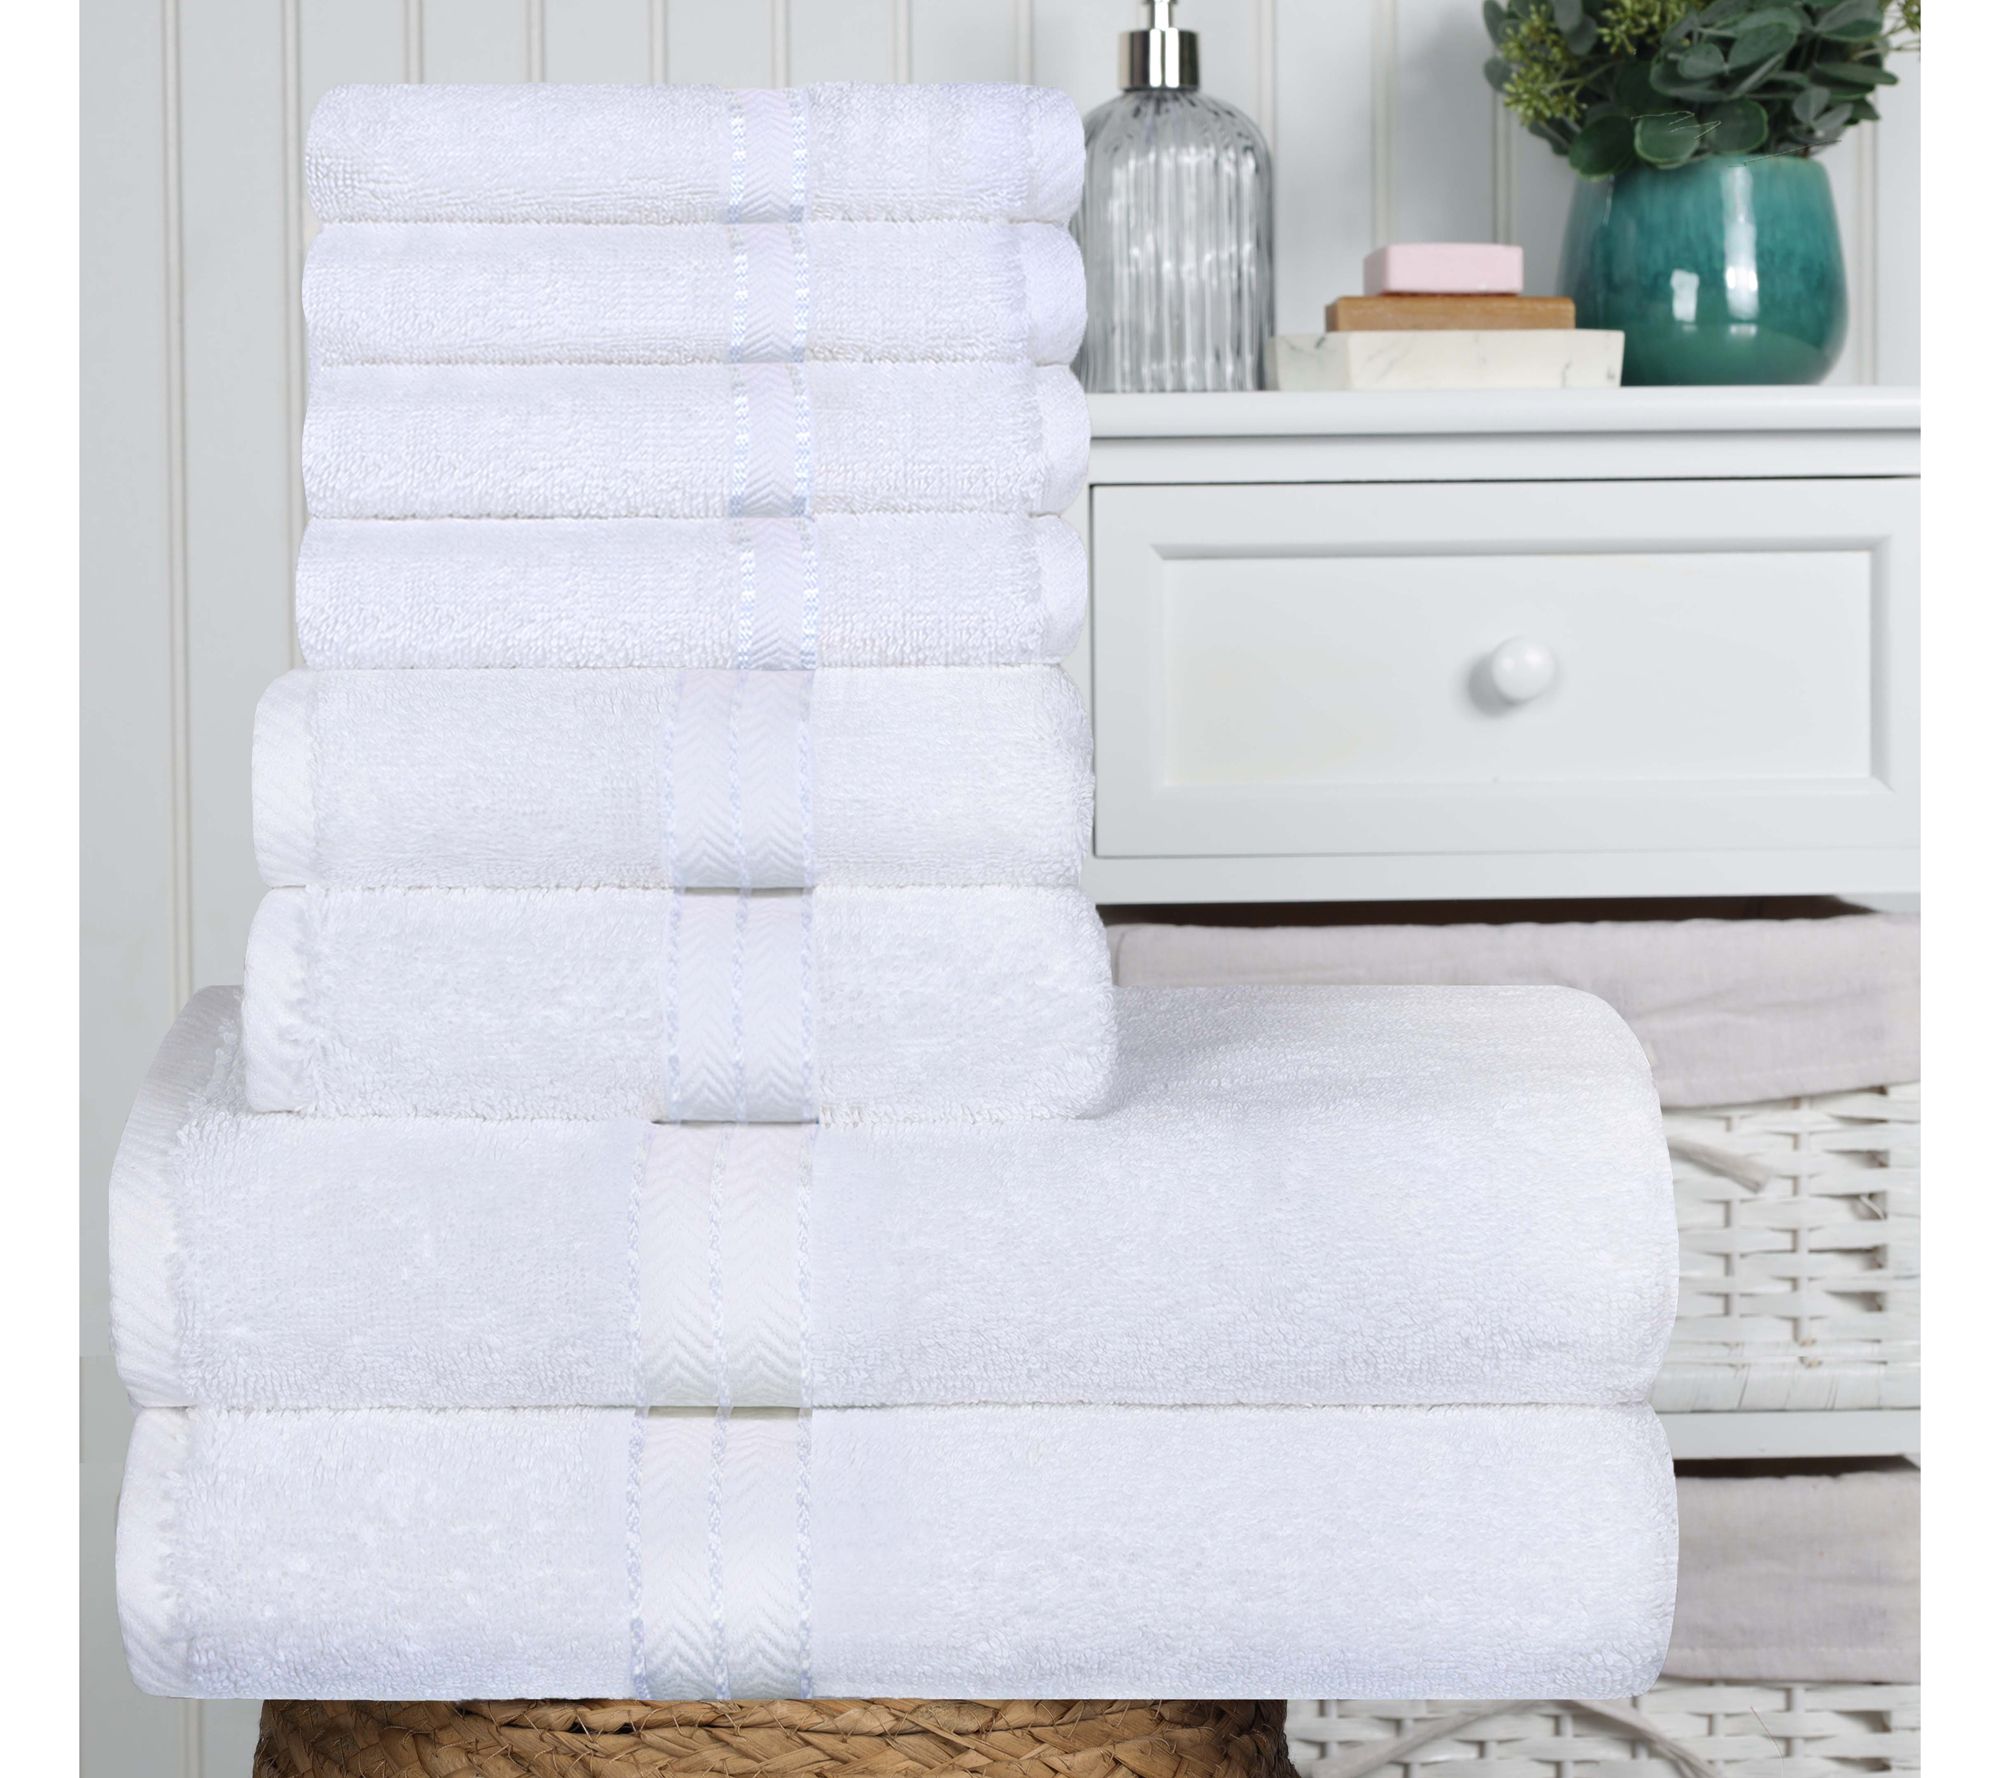  SUPERIOR Cotton Towel Set, Absorbent, Fast-Drying 8-Piece Towels,  Bathroom Decor, Marble Solid Pattern, Includes 2 Bath, 2 Face, and 4 Hand  Towels, Grey : Home & Kitchen